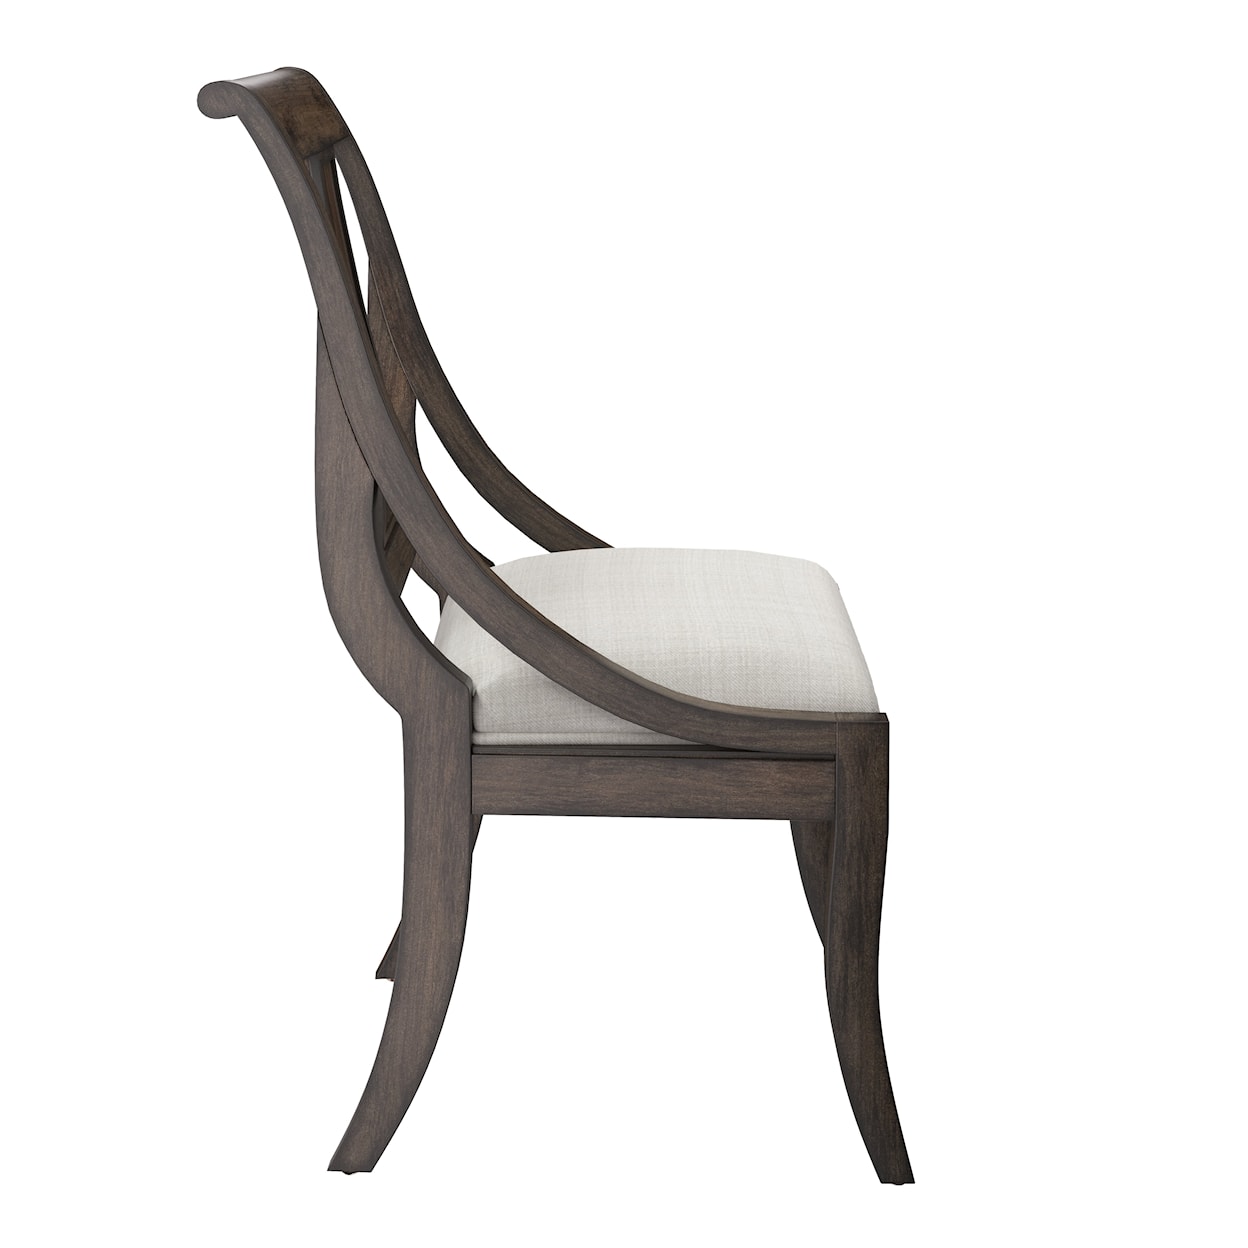 Hekman Lincoln Park Dining Side Chair